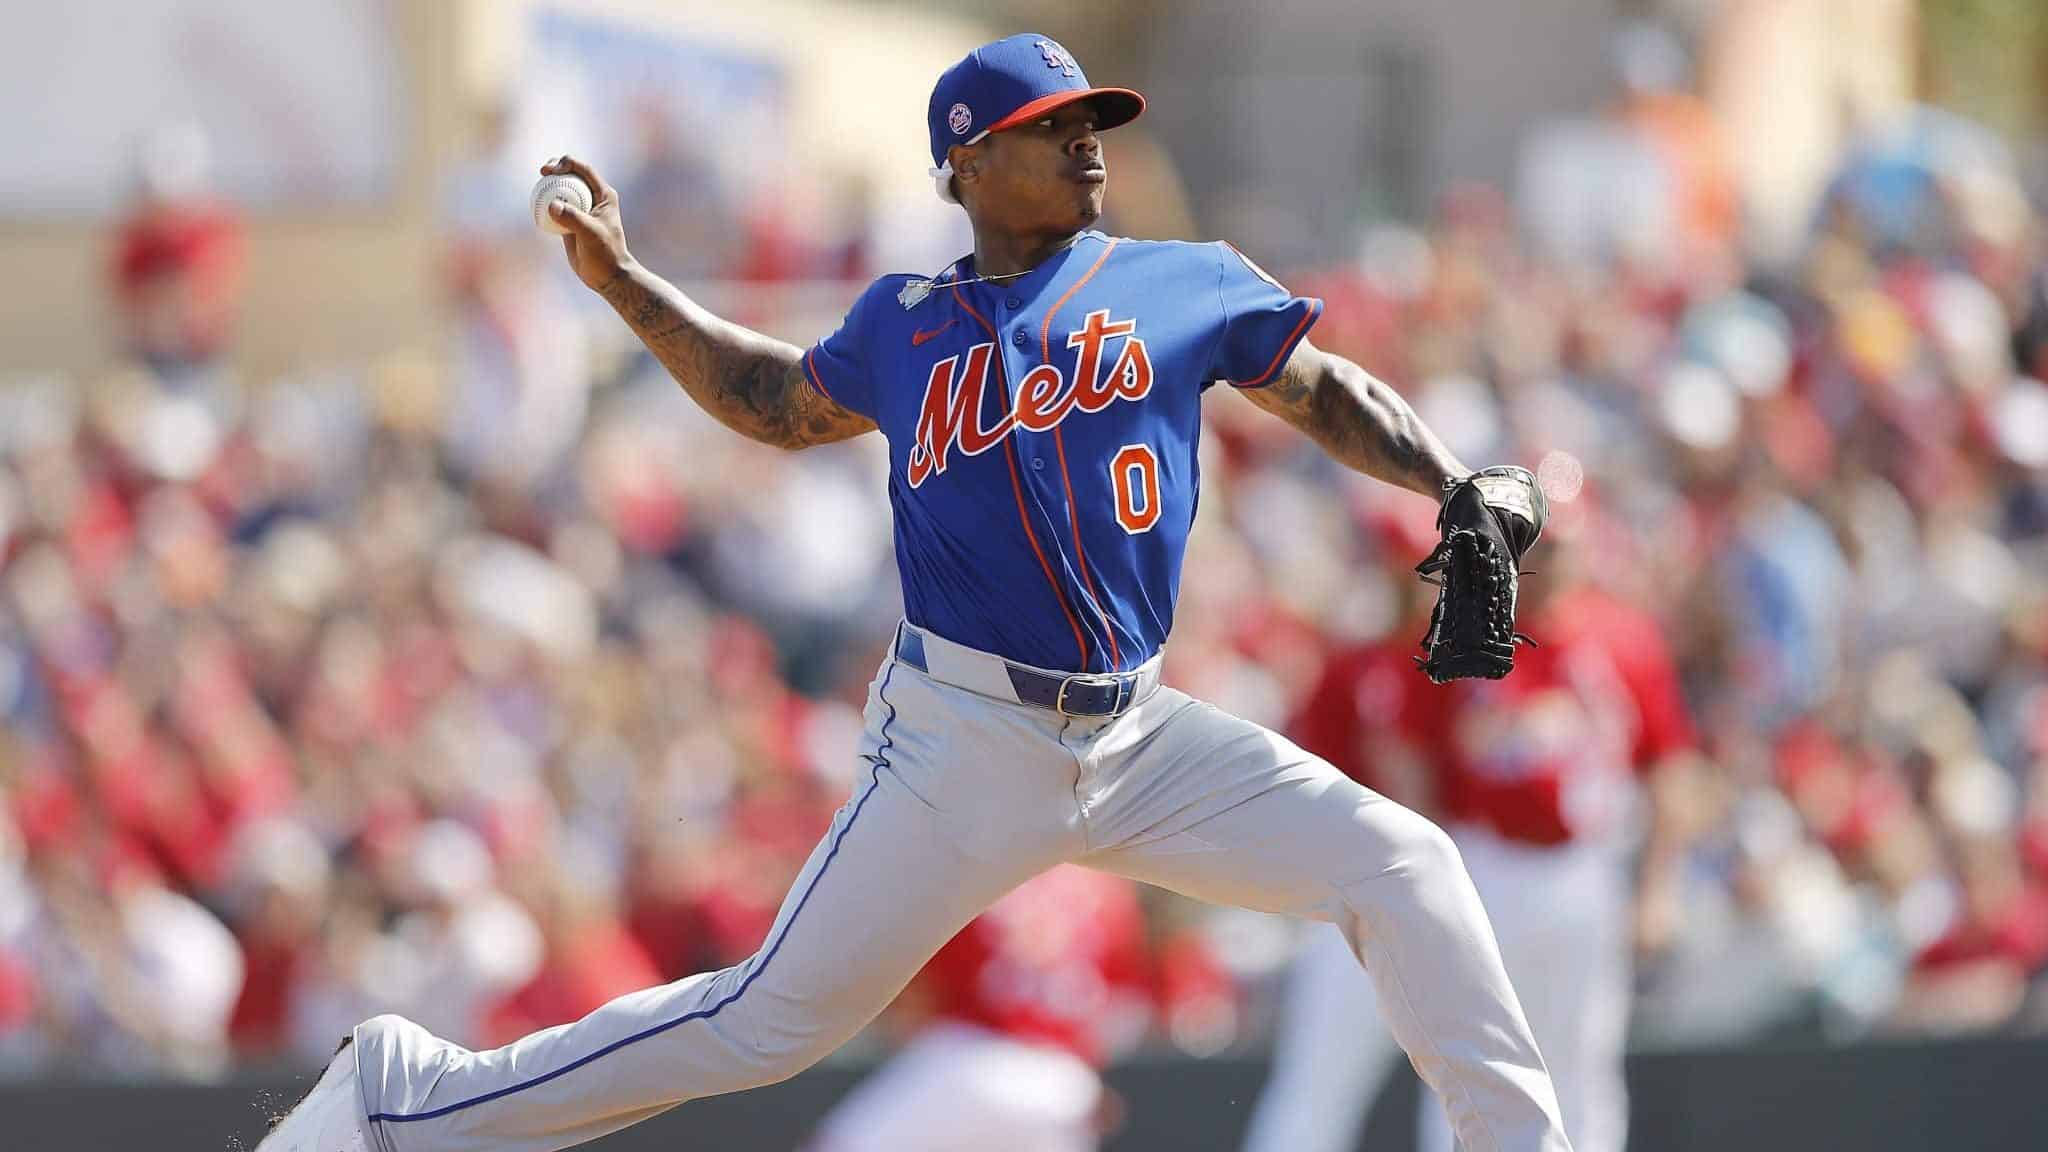 JUPITER, FLORIDA - FEBRUARY 22: Marcus Stroman #0 of the New York Mets delivers a pitch in the second inning of a Grapefruit League spring training game at Roger Dean Stadium on February 22, 2020 in Jupiter, Florida.